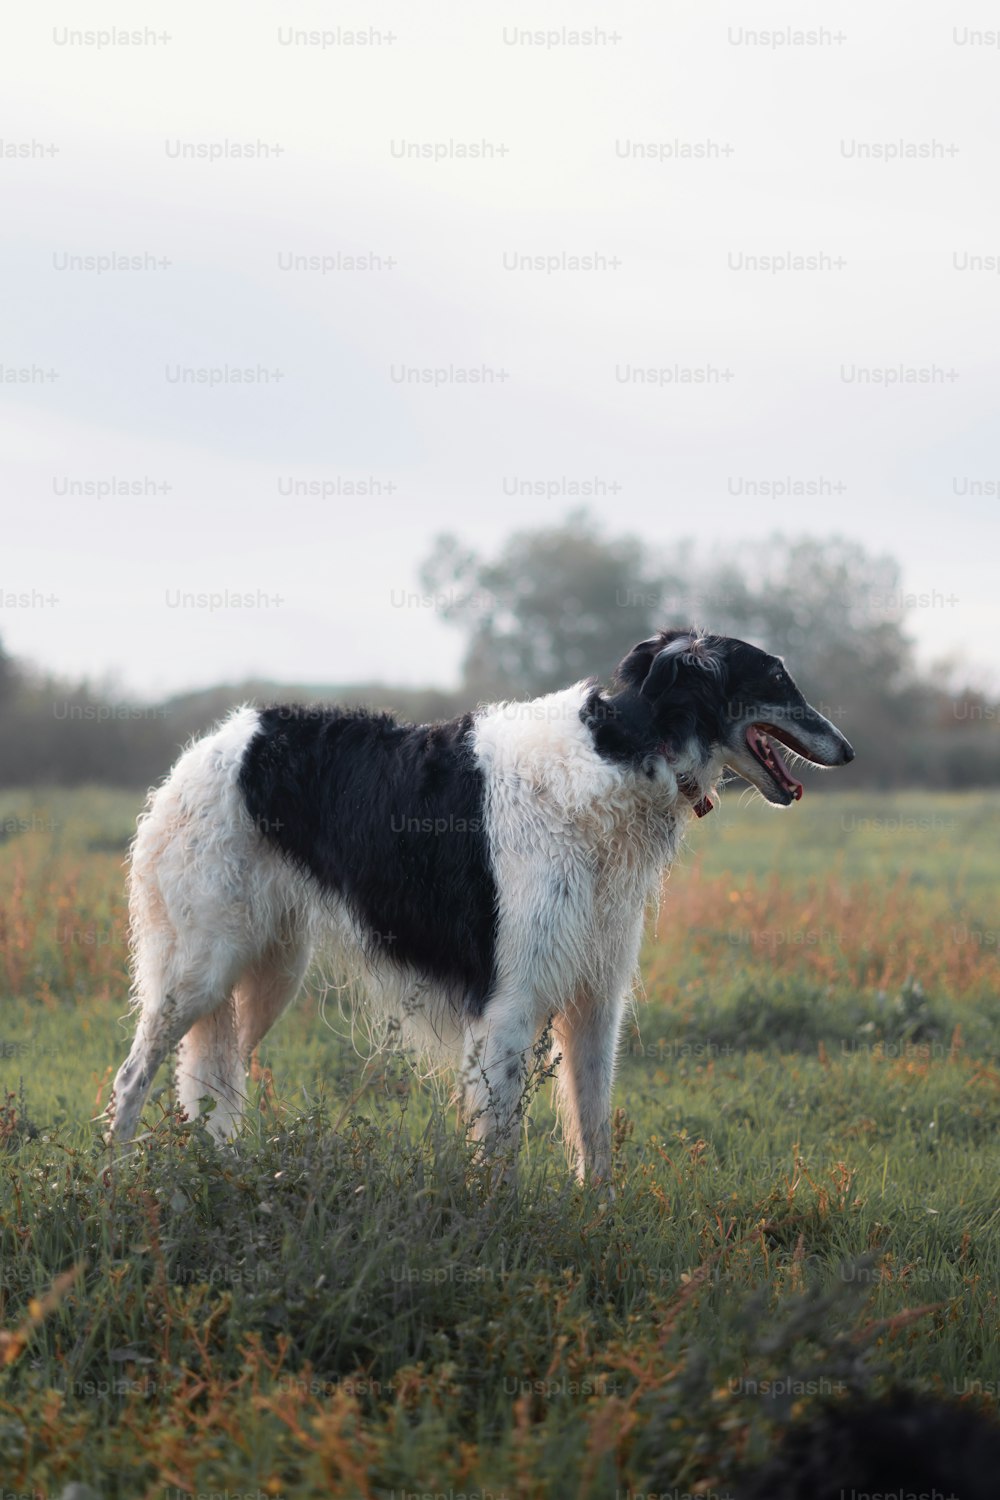 a black and white dog standing in a field